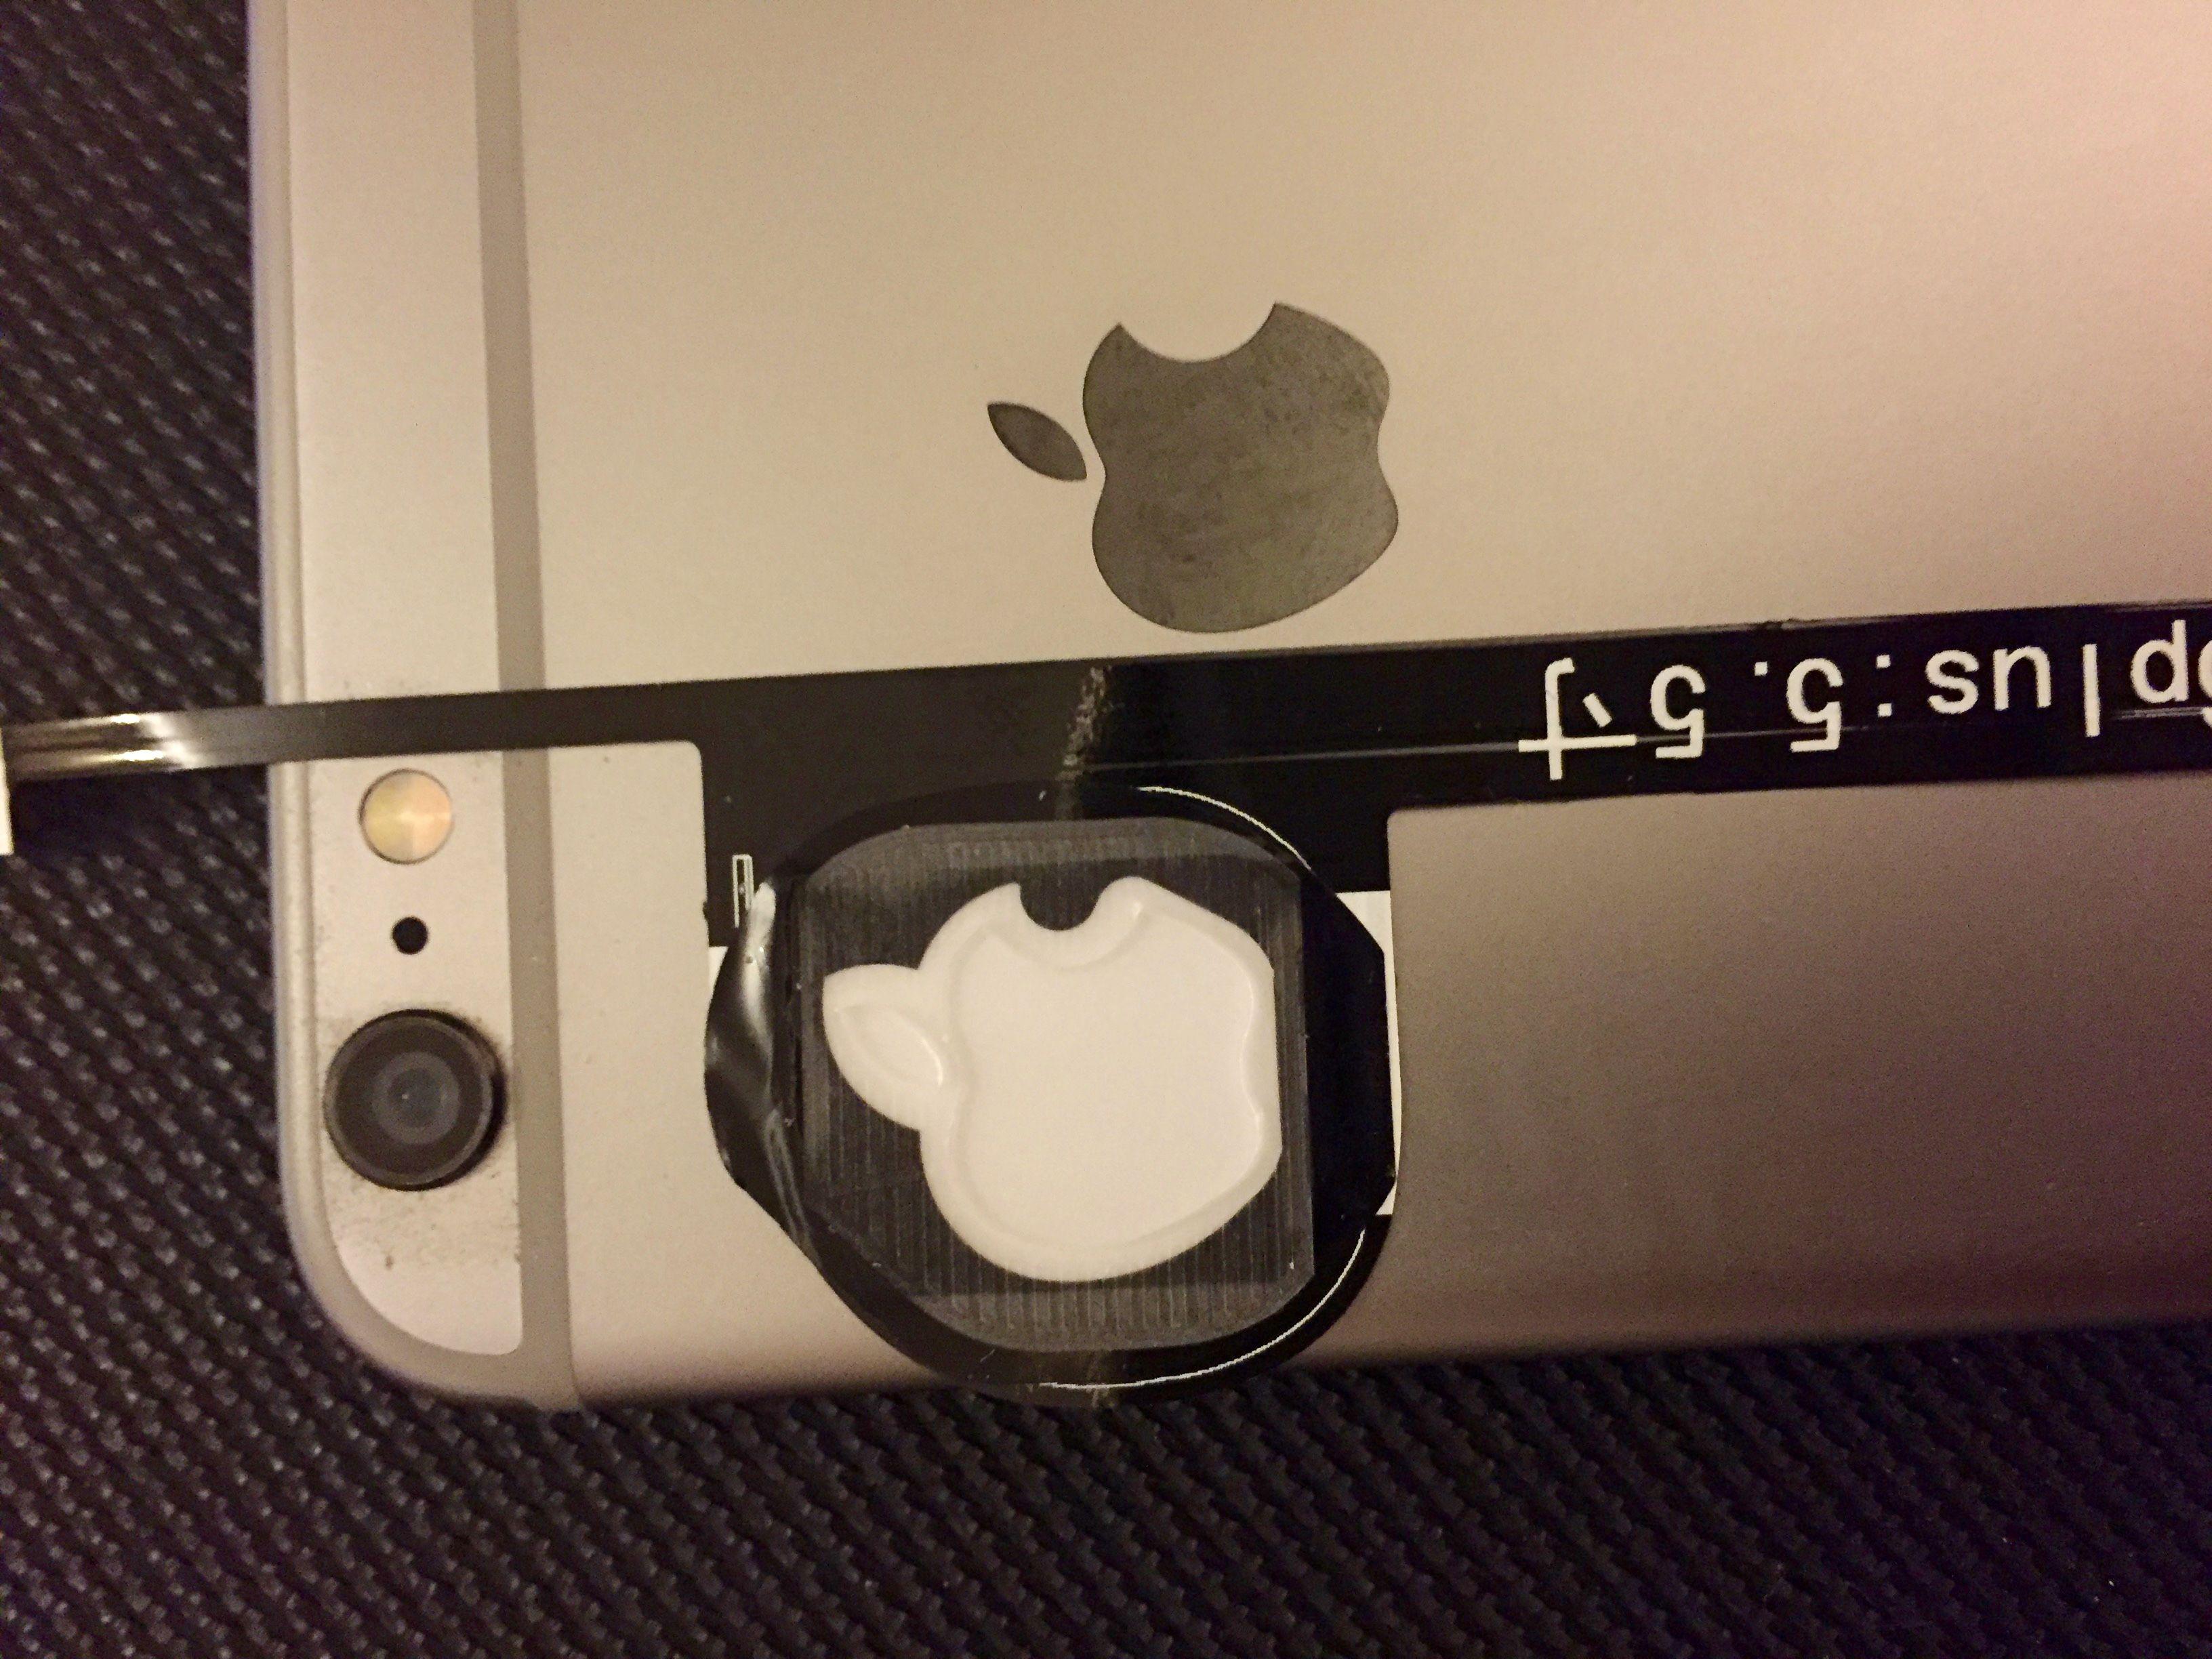 Apple Plus Logo - How to replace the Apple logo on iPhone 6 Plus with LED